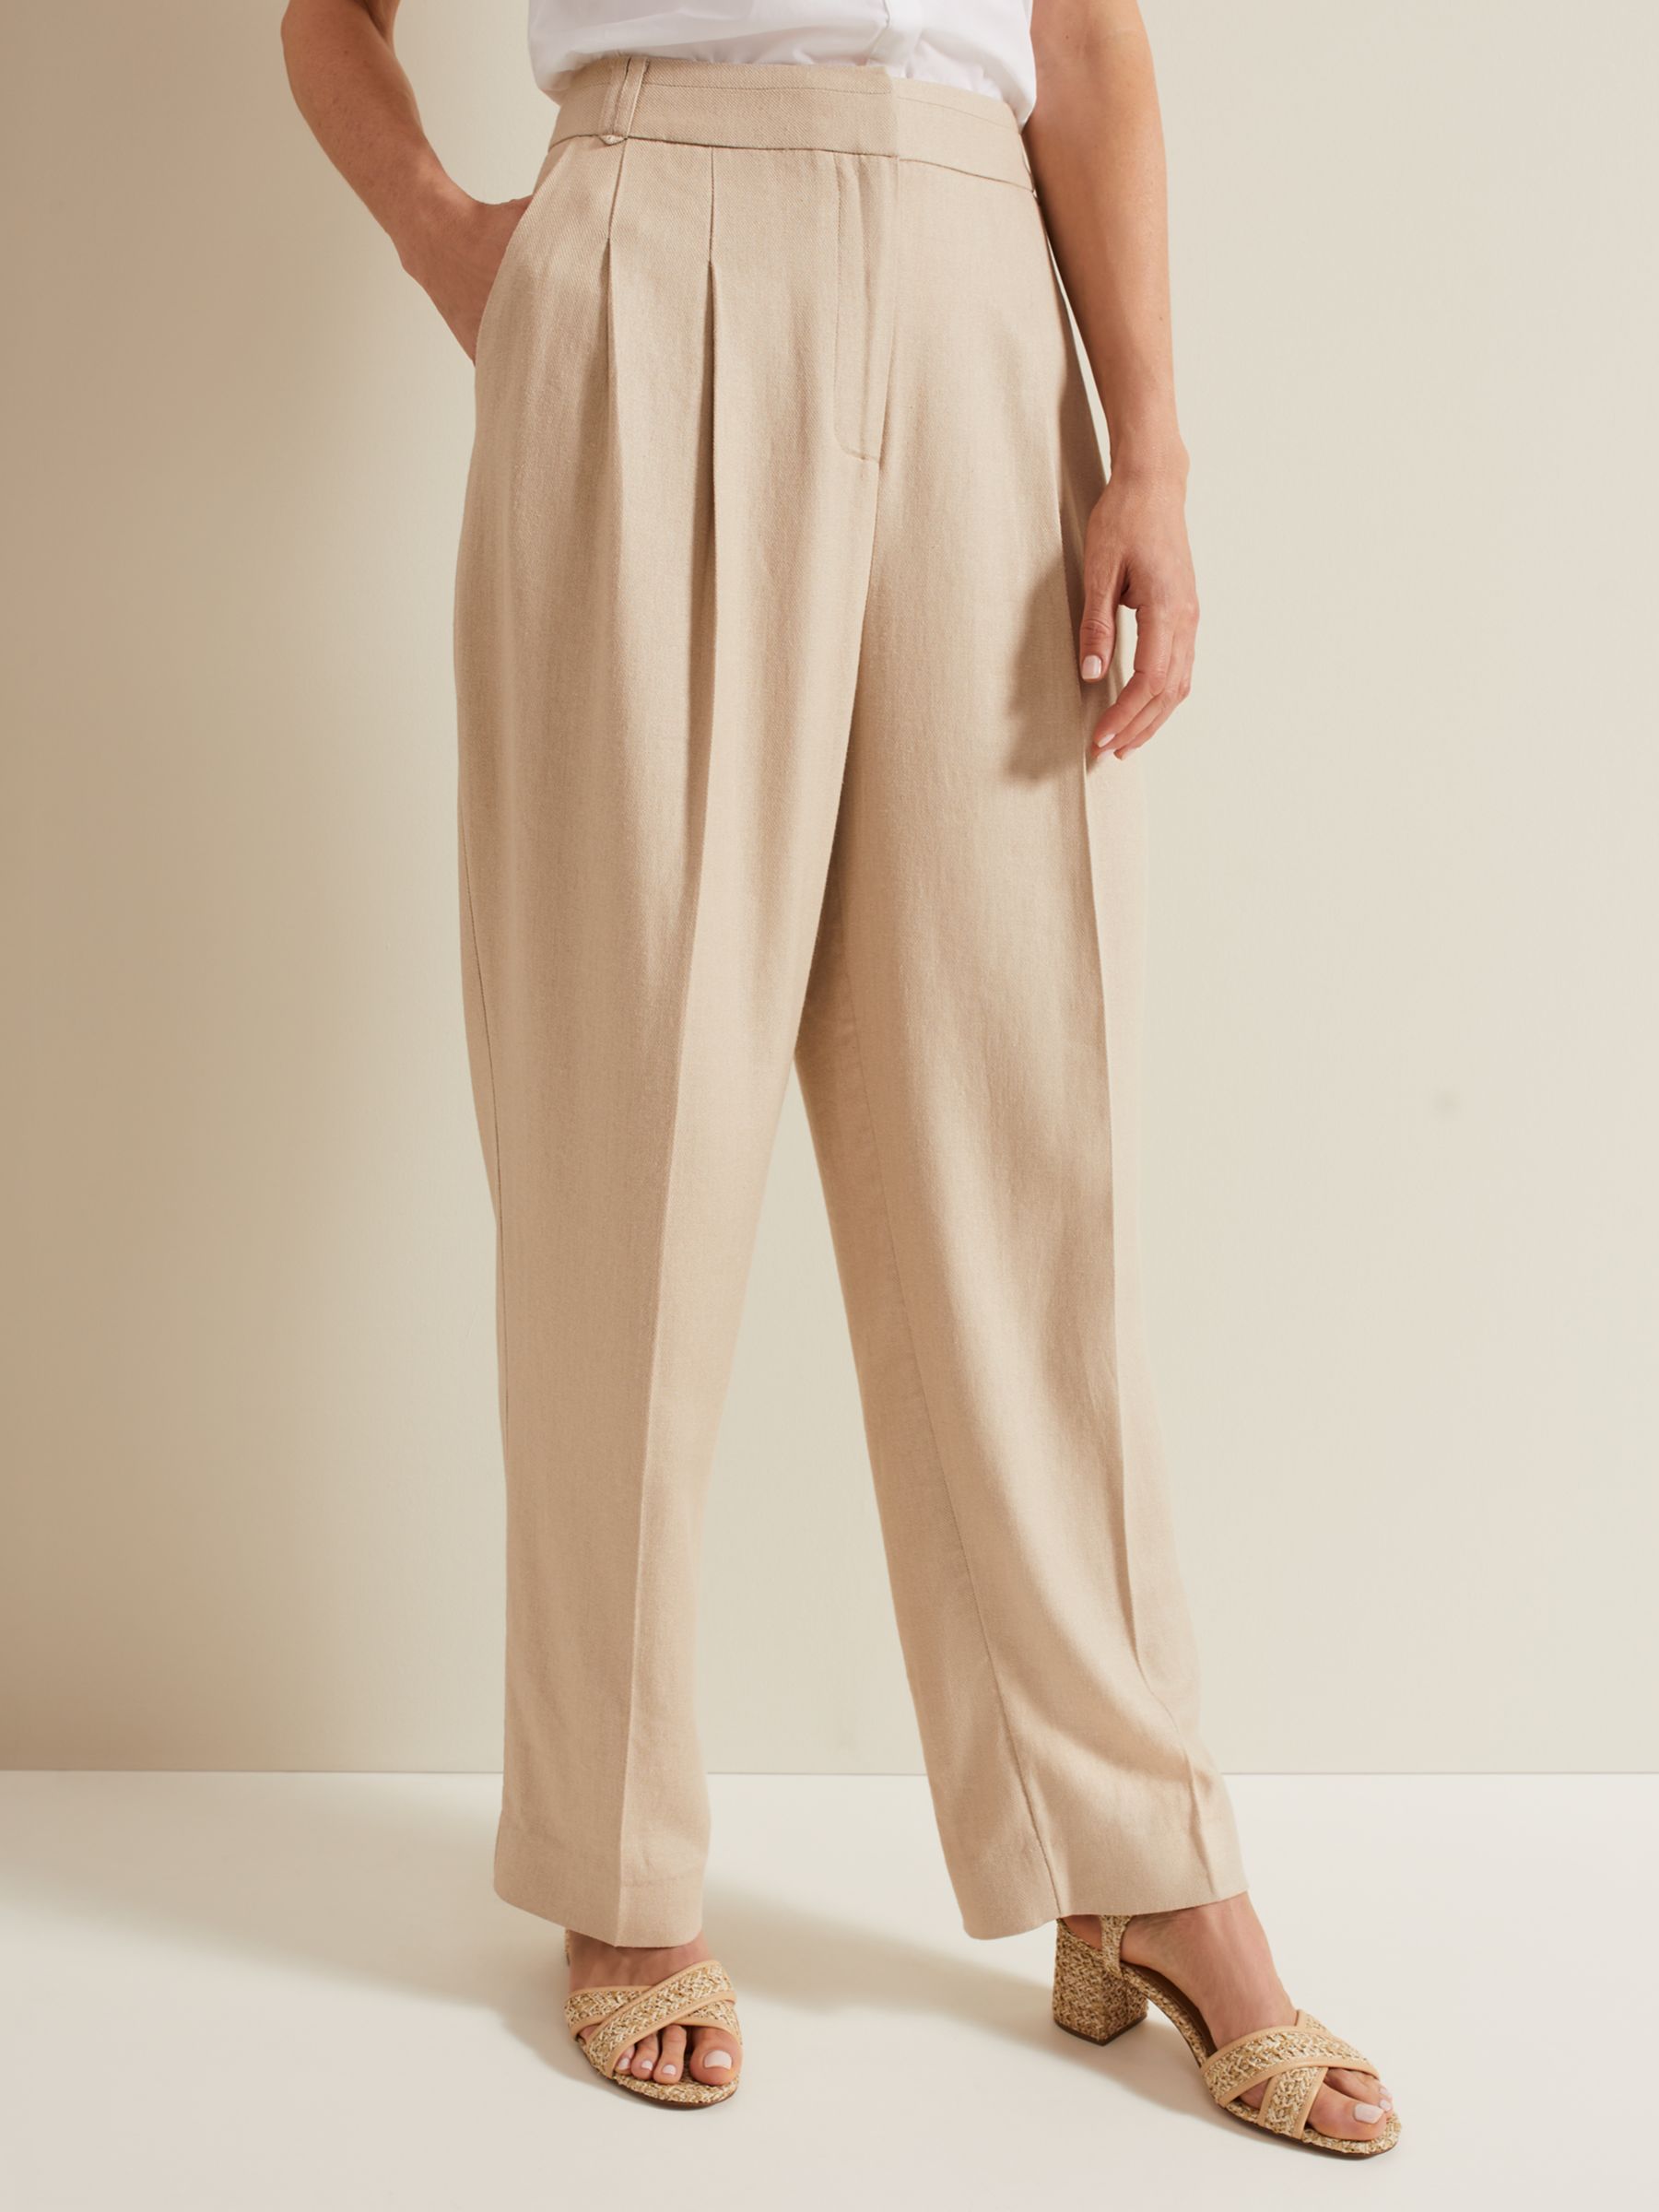 Phase Eight Addison Linen Blend Trousers, Stone, 8